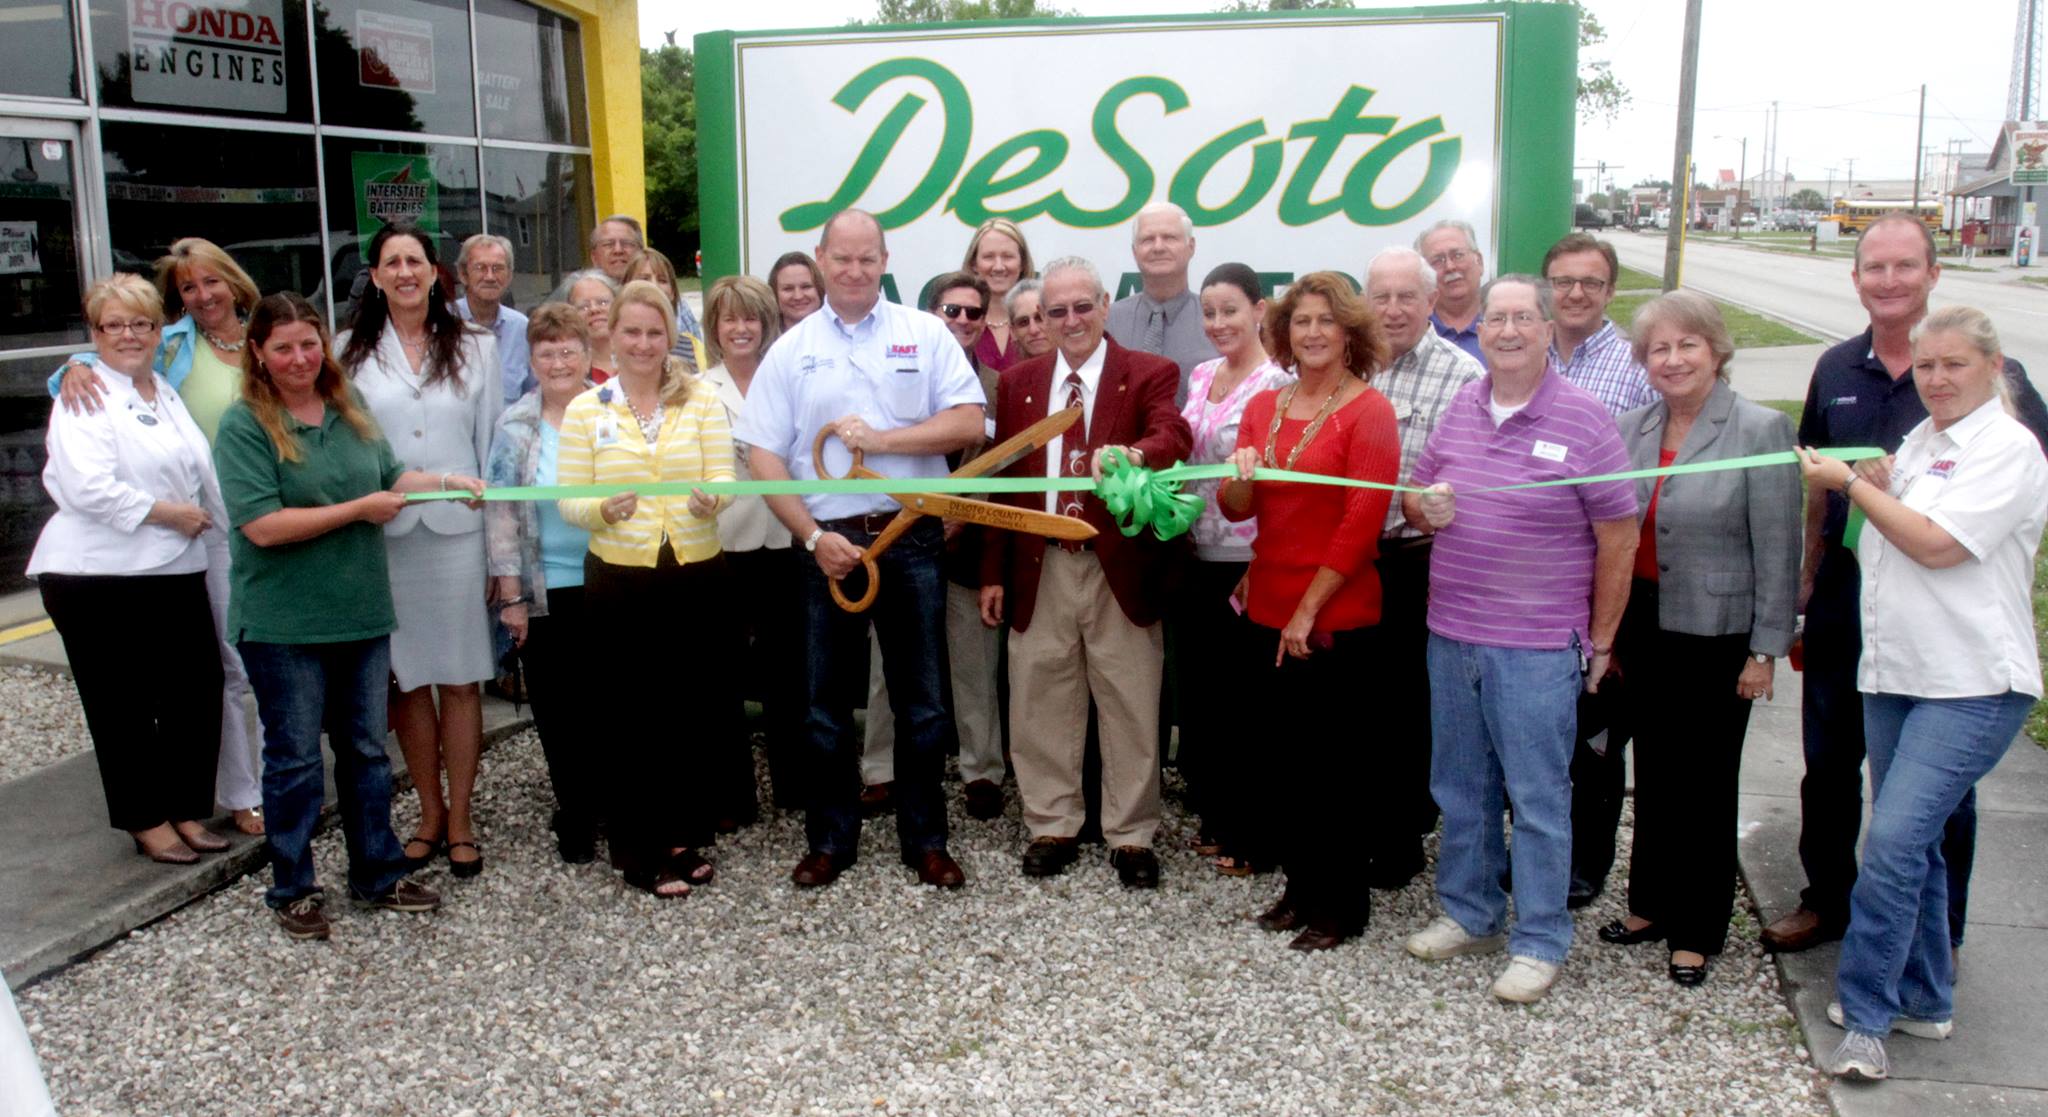 Staff and guests at DeSoto Ag & Auto's ribbon cutting